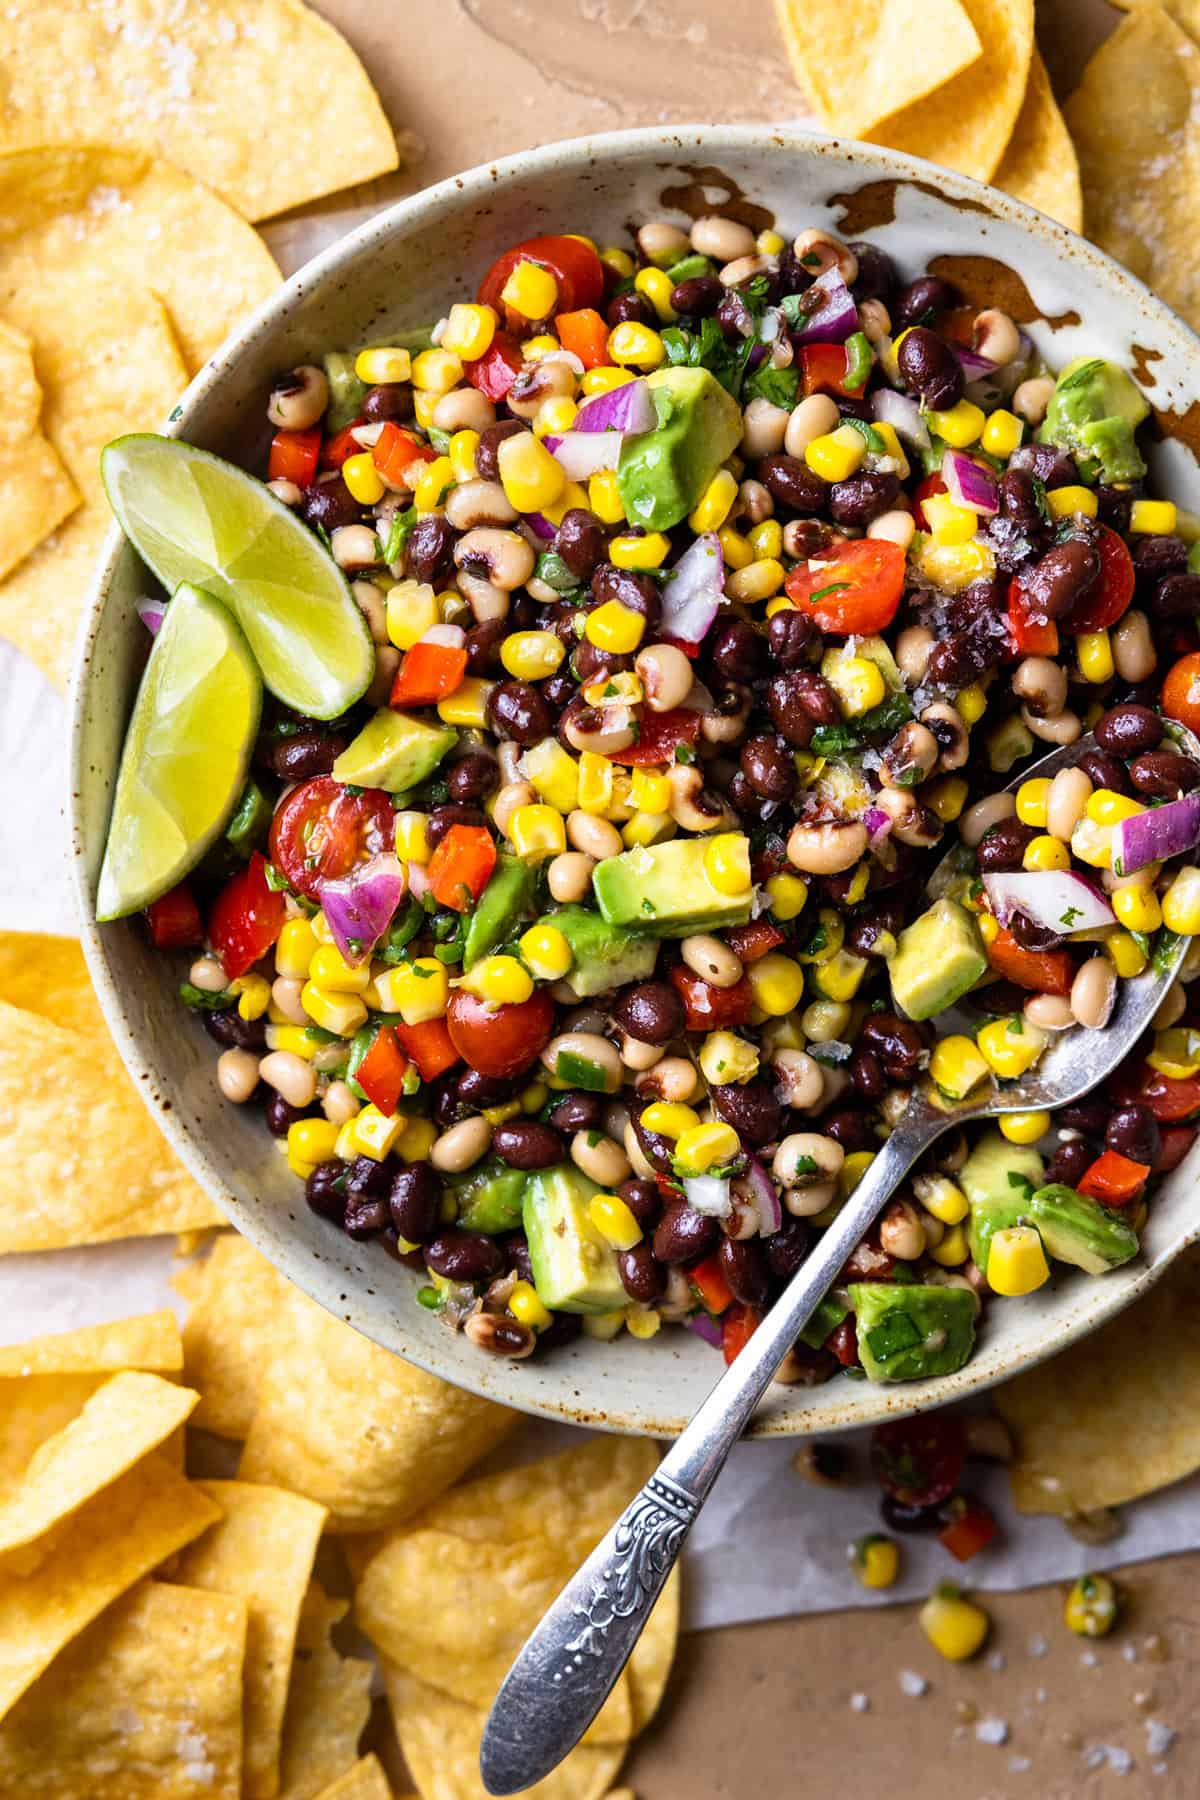 Bowl of Texas Caviar black eyed pea dip served with lime garnish.